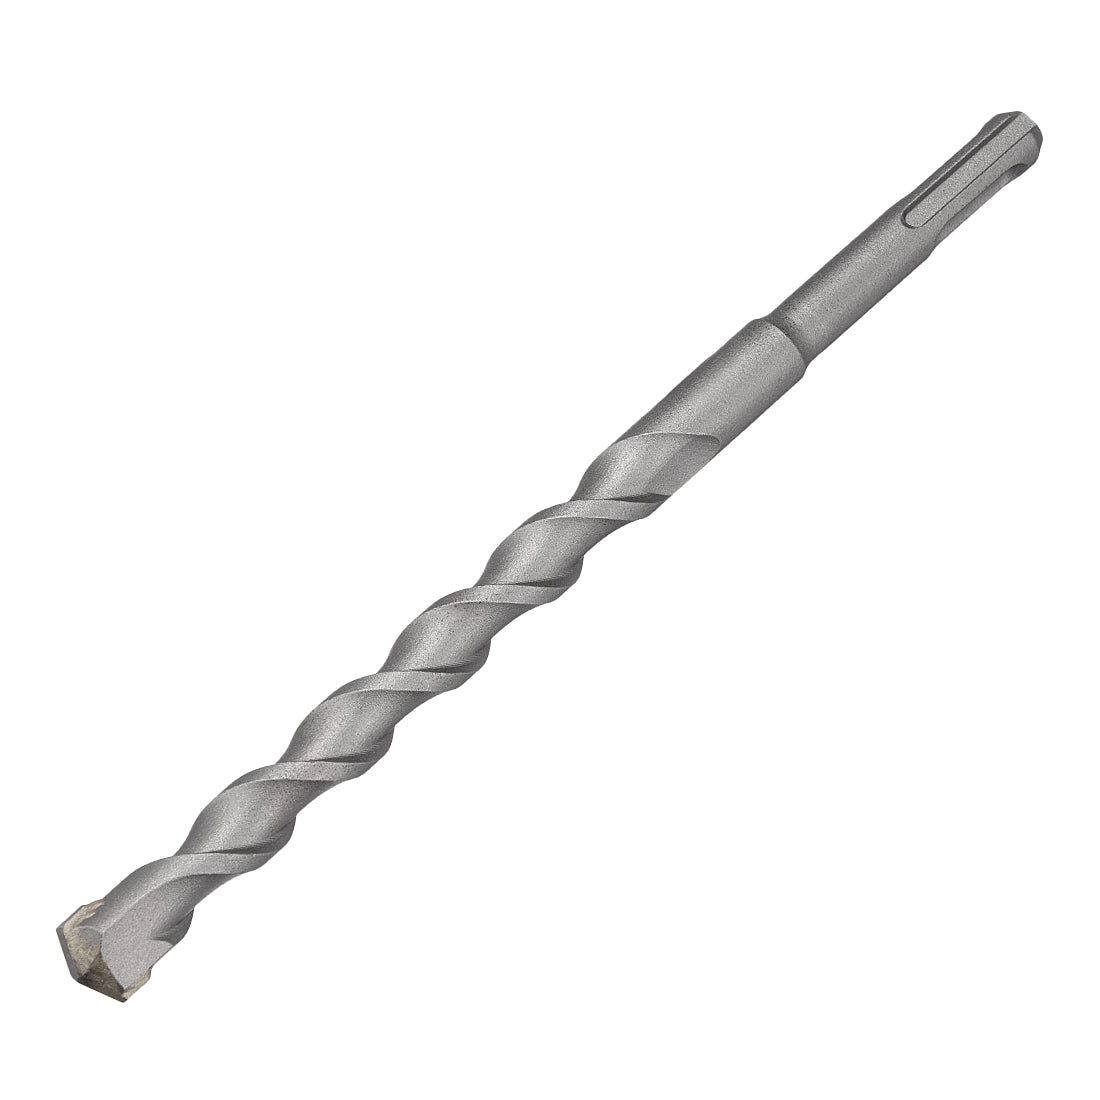 uxcell Uxcell Masonry Drill Bit 14mmx200mm 10mm Round Shank for Impact Drill